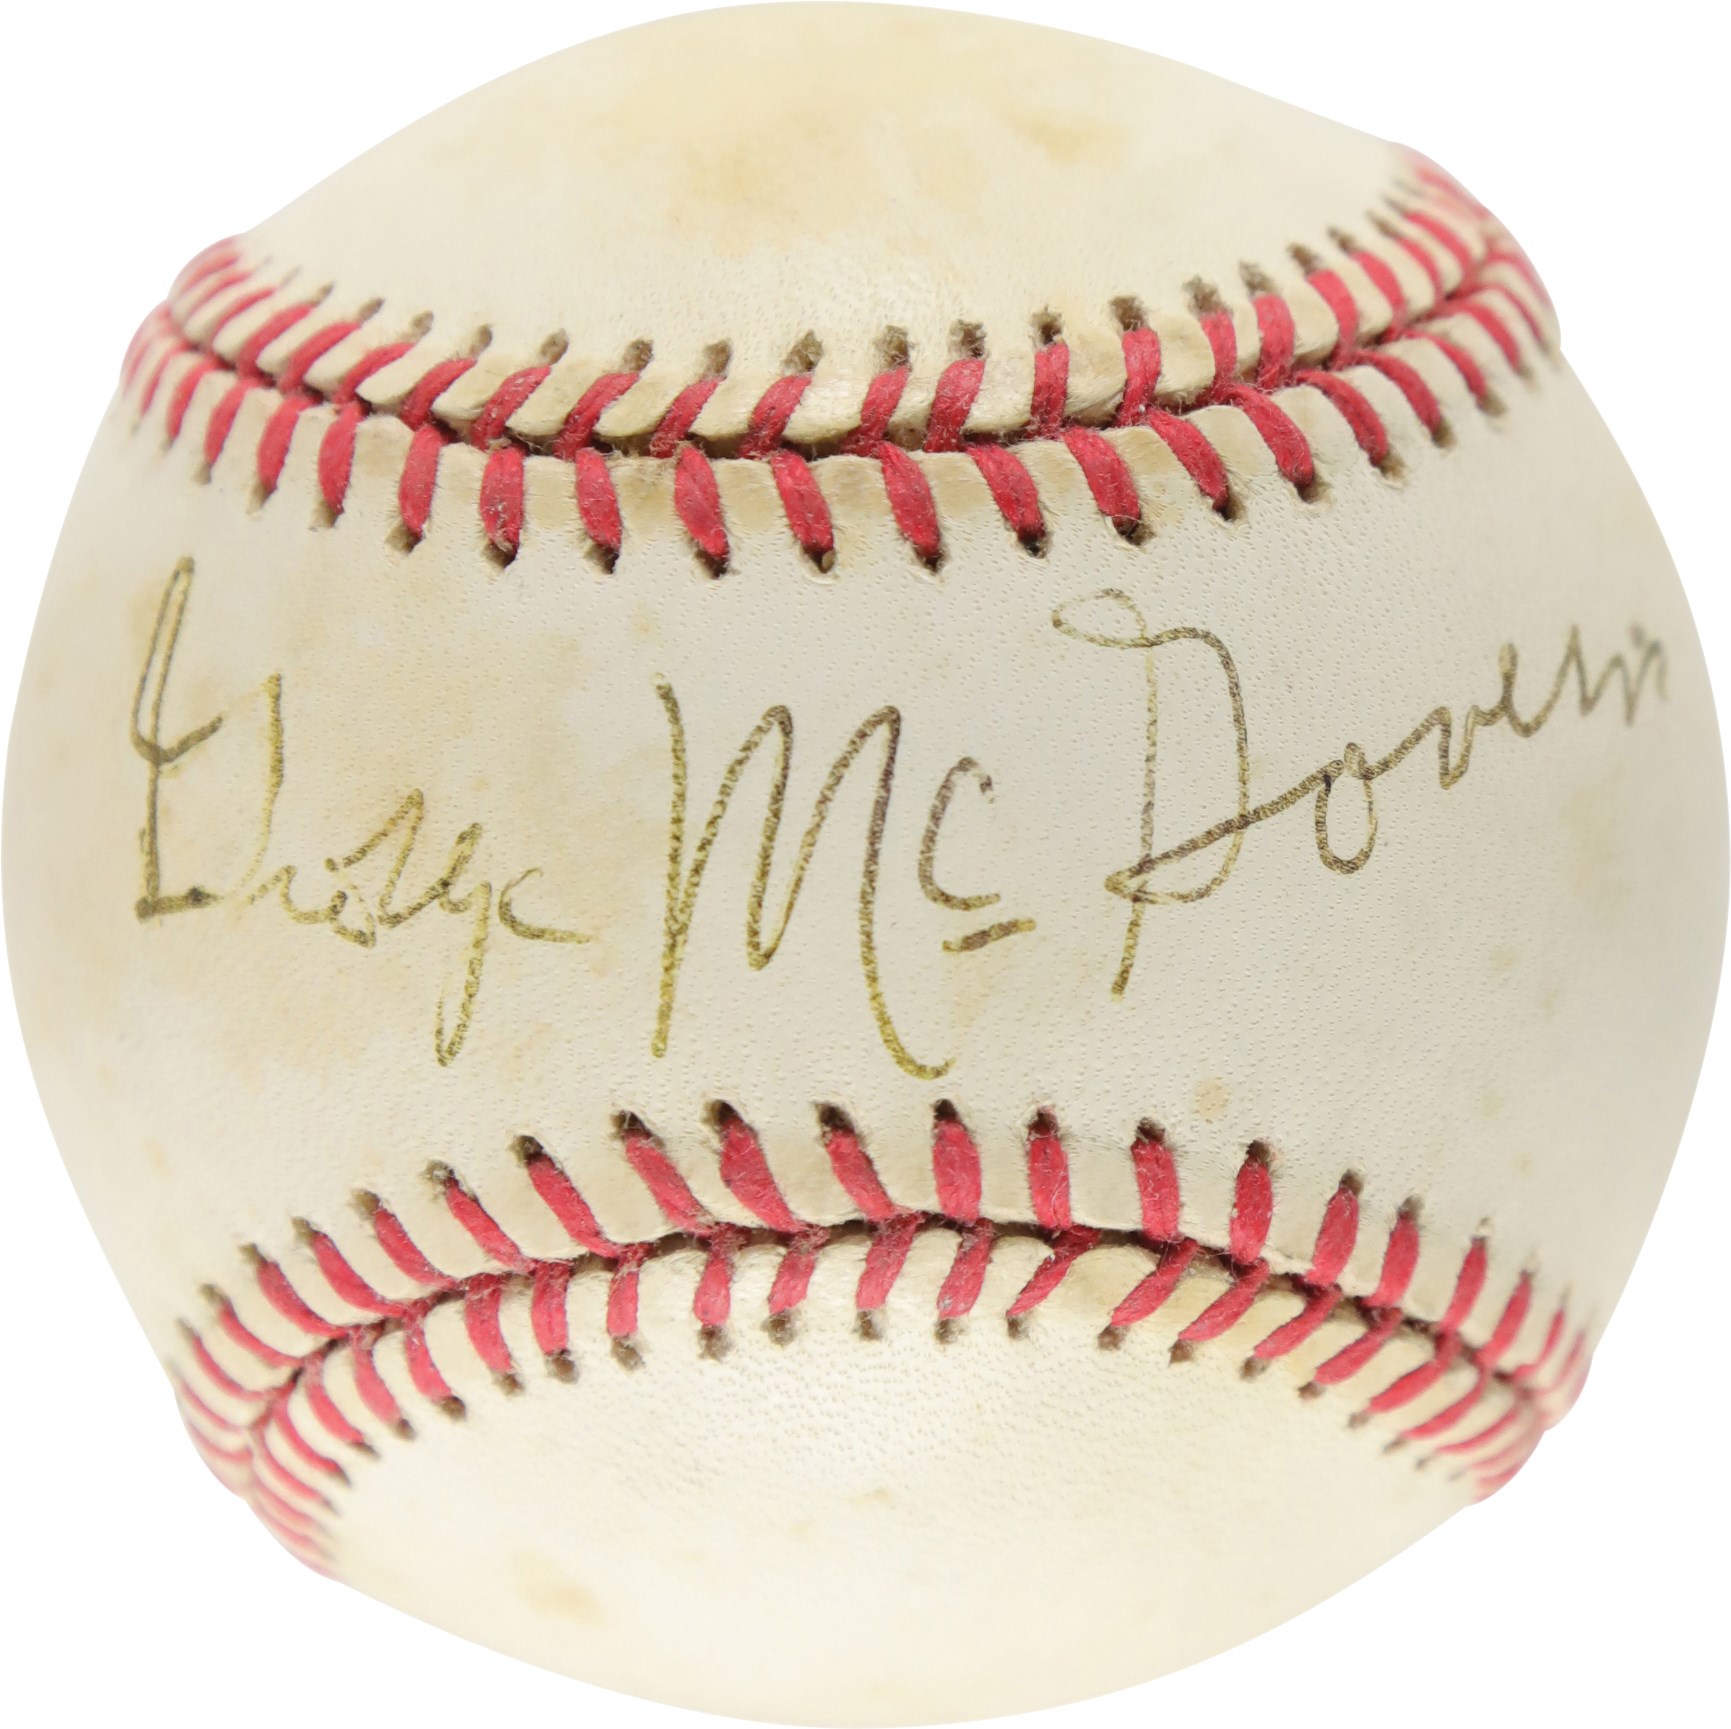 Rock And Pop Culture - George McGovern Single-Signed Baseball (PSA)